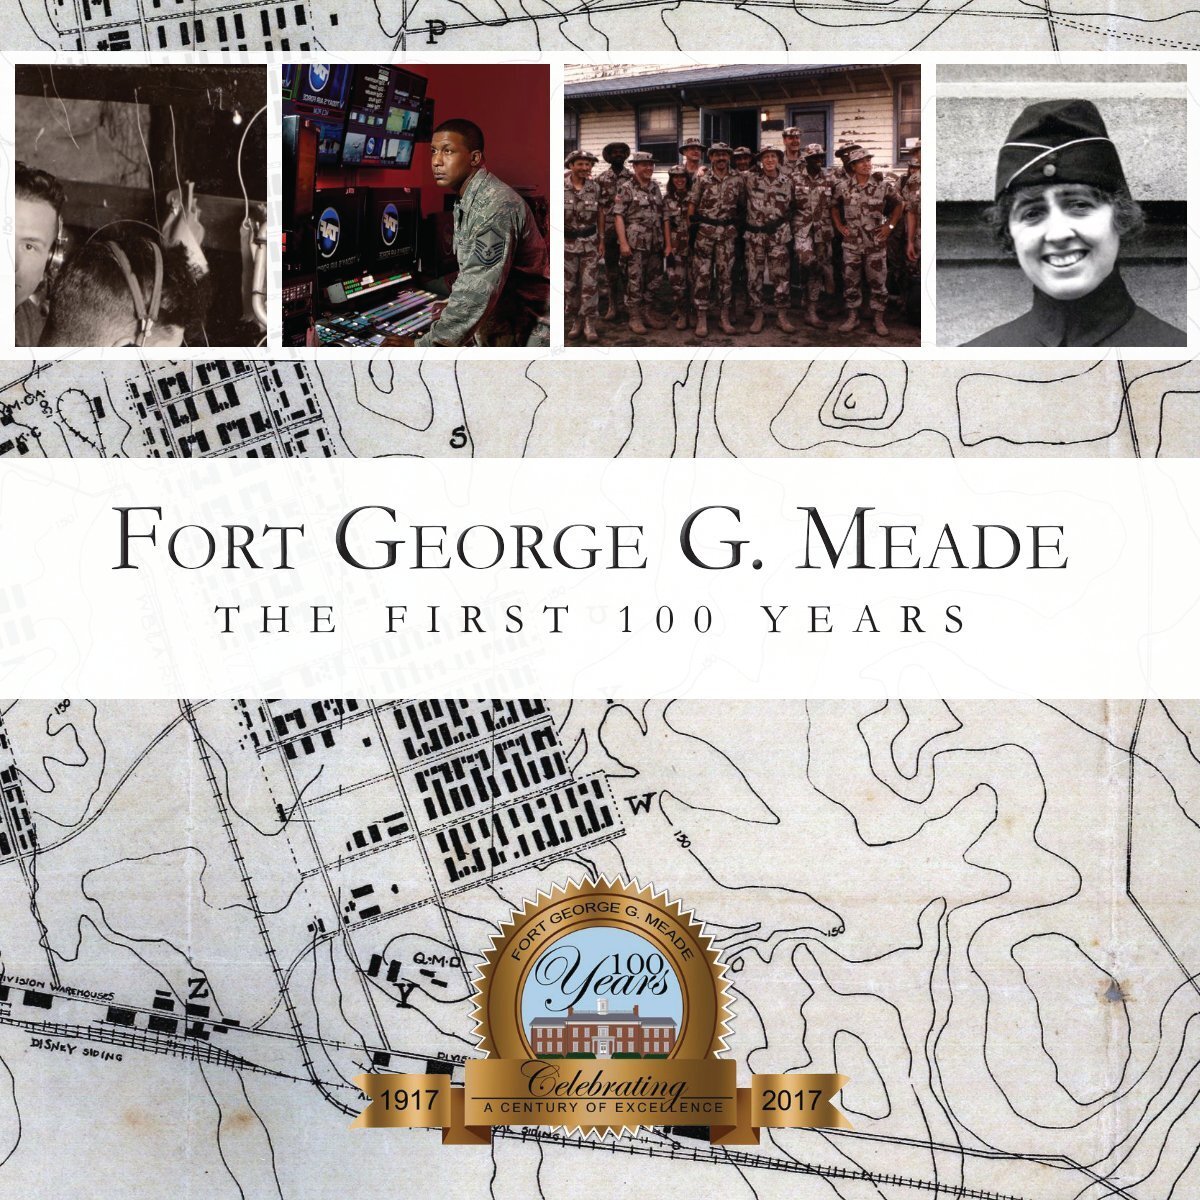 Fort George G. Meade: The First 100 Years